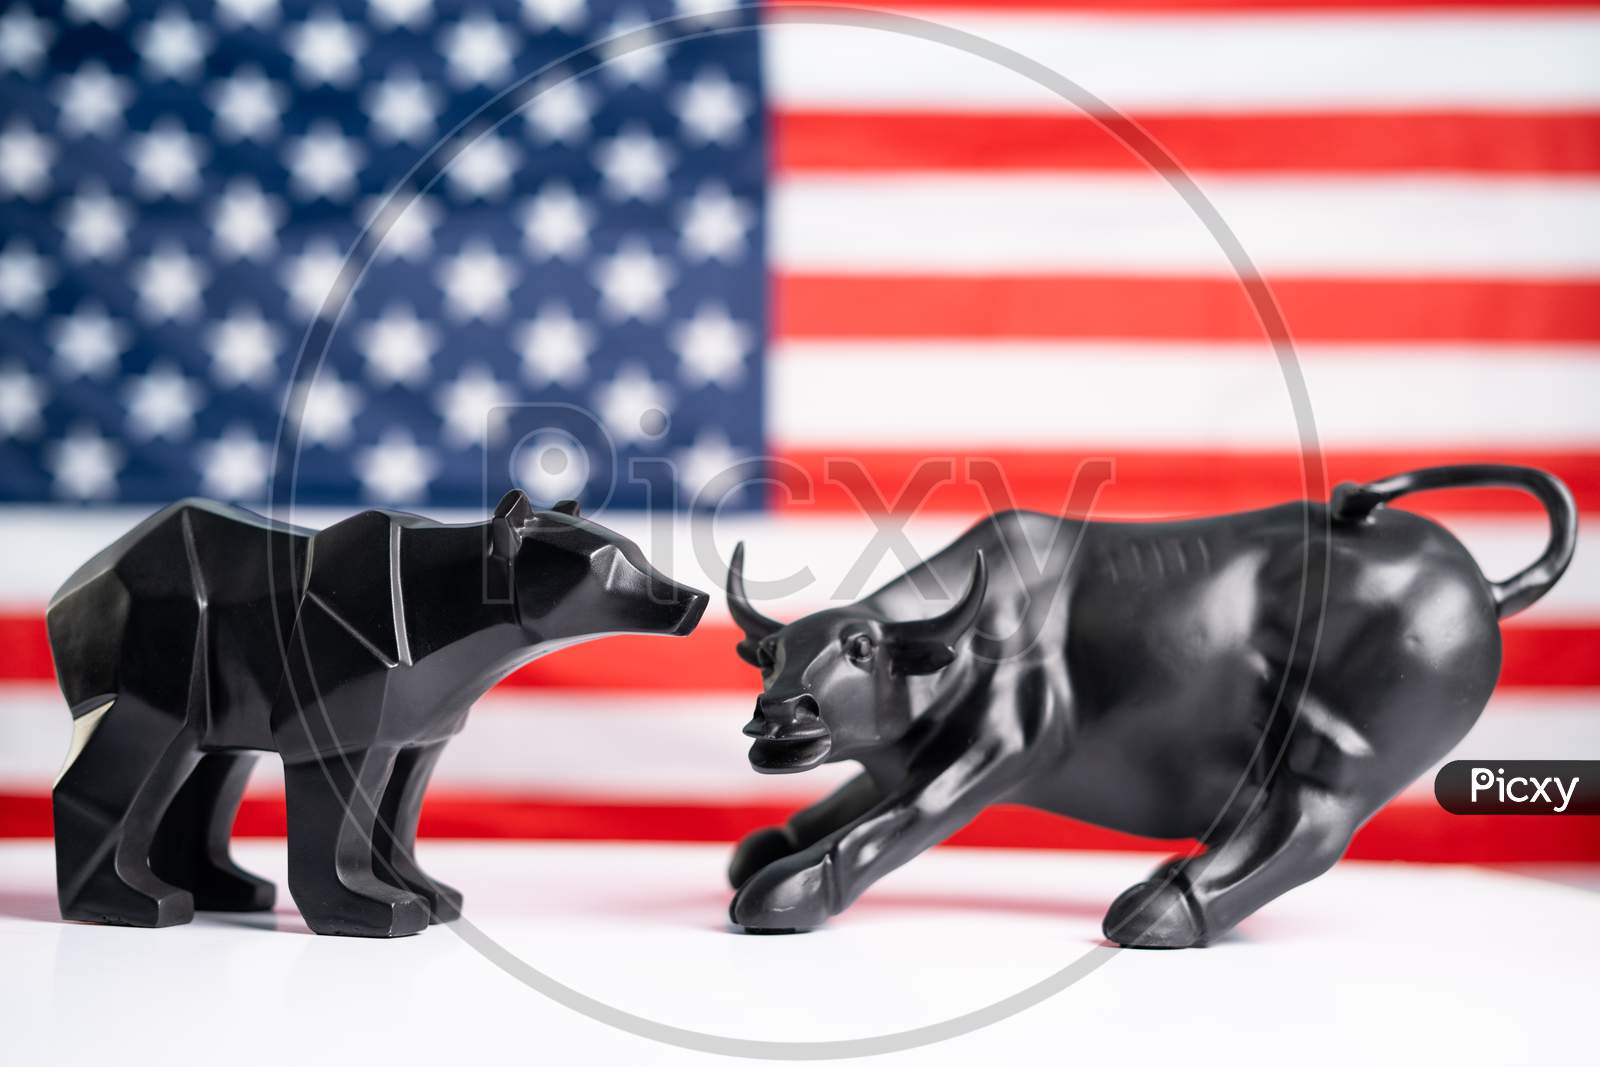 Stock Market Bull And Bear With American Flag As Background - Concept Of Investment In Us Equity Shares Market.